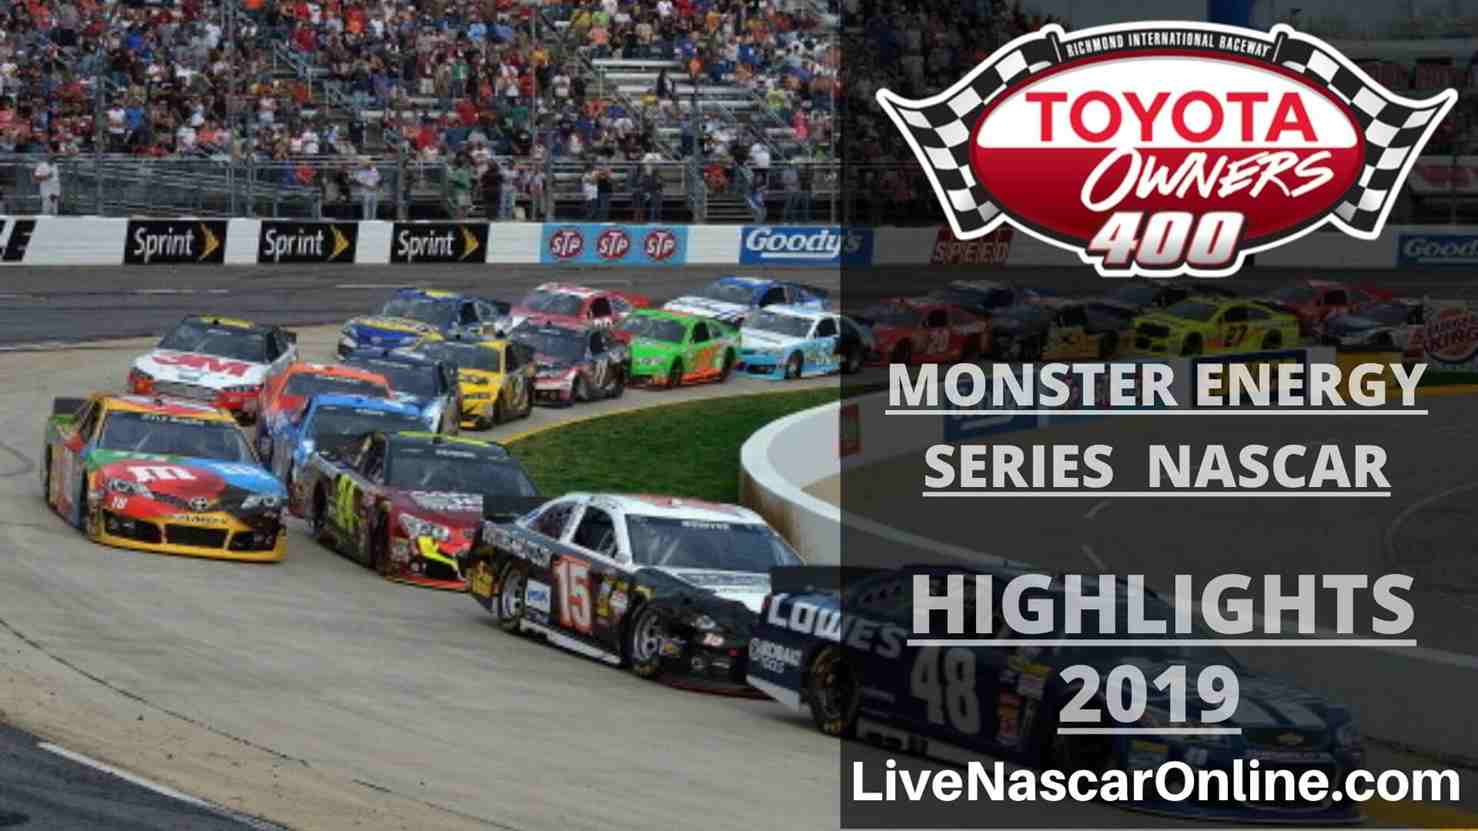 NASCAR TOYOTA OWNERS 400 HIGHLIGHTS 2019